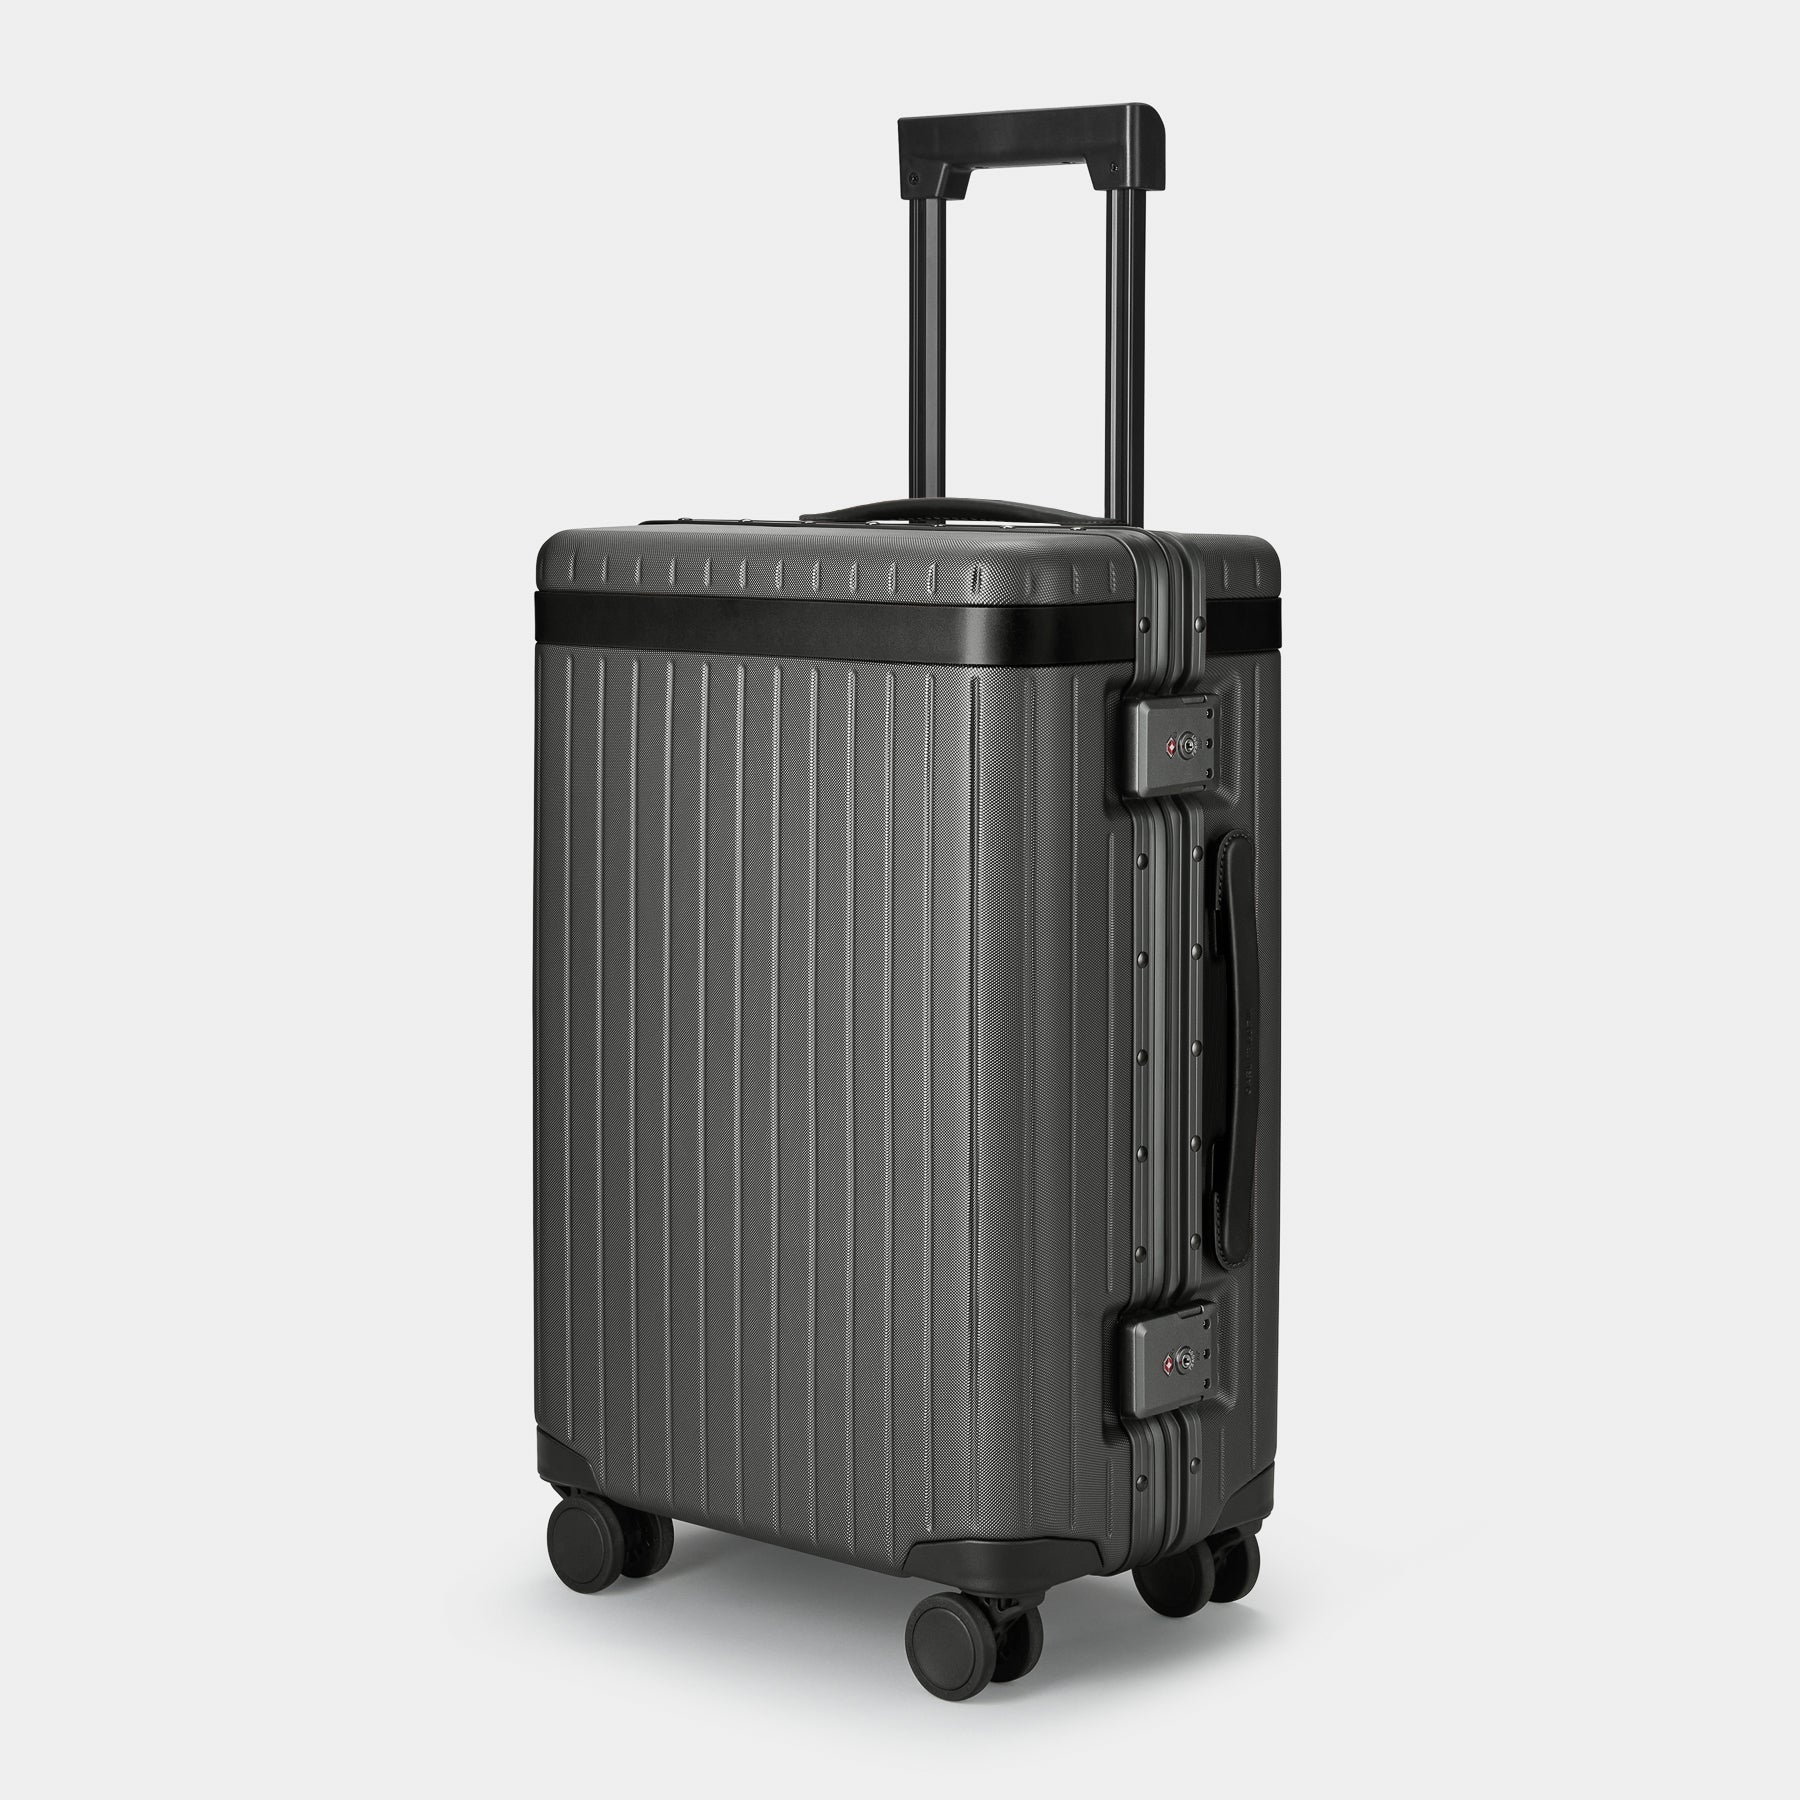 The Carry-on - Sample Black Dark grey polycarbonate suitcase - Excellent Condition